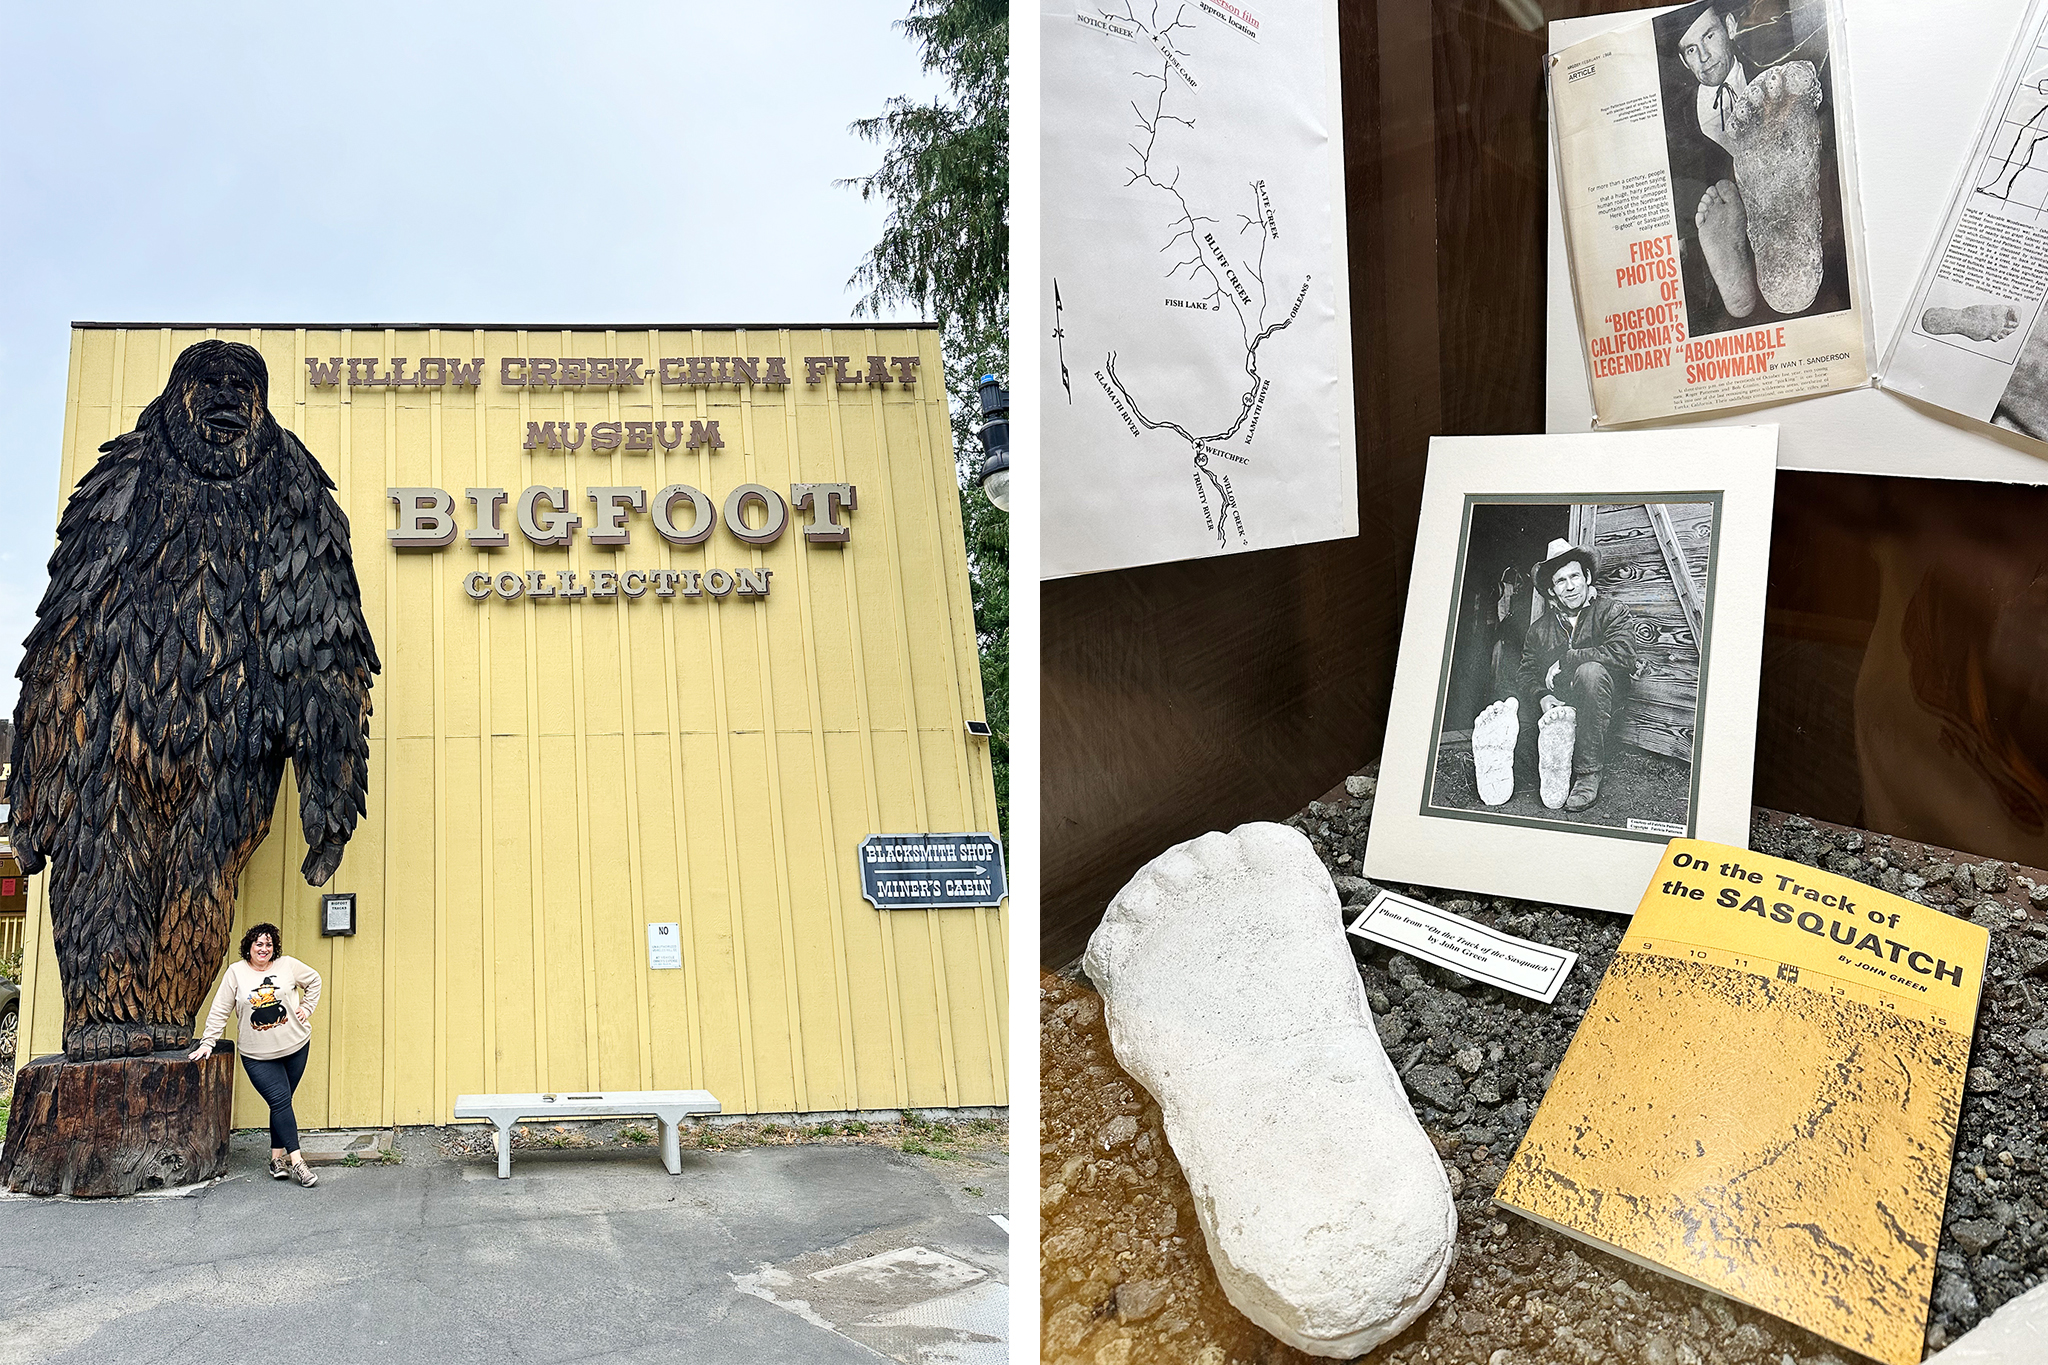 The Northern California town obsessed with Bigfoot